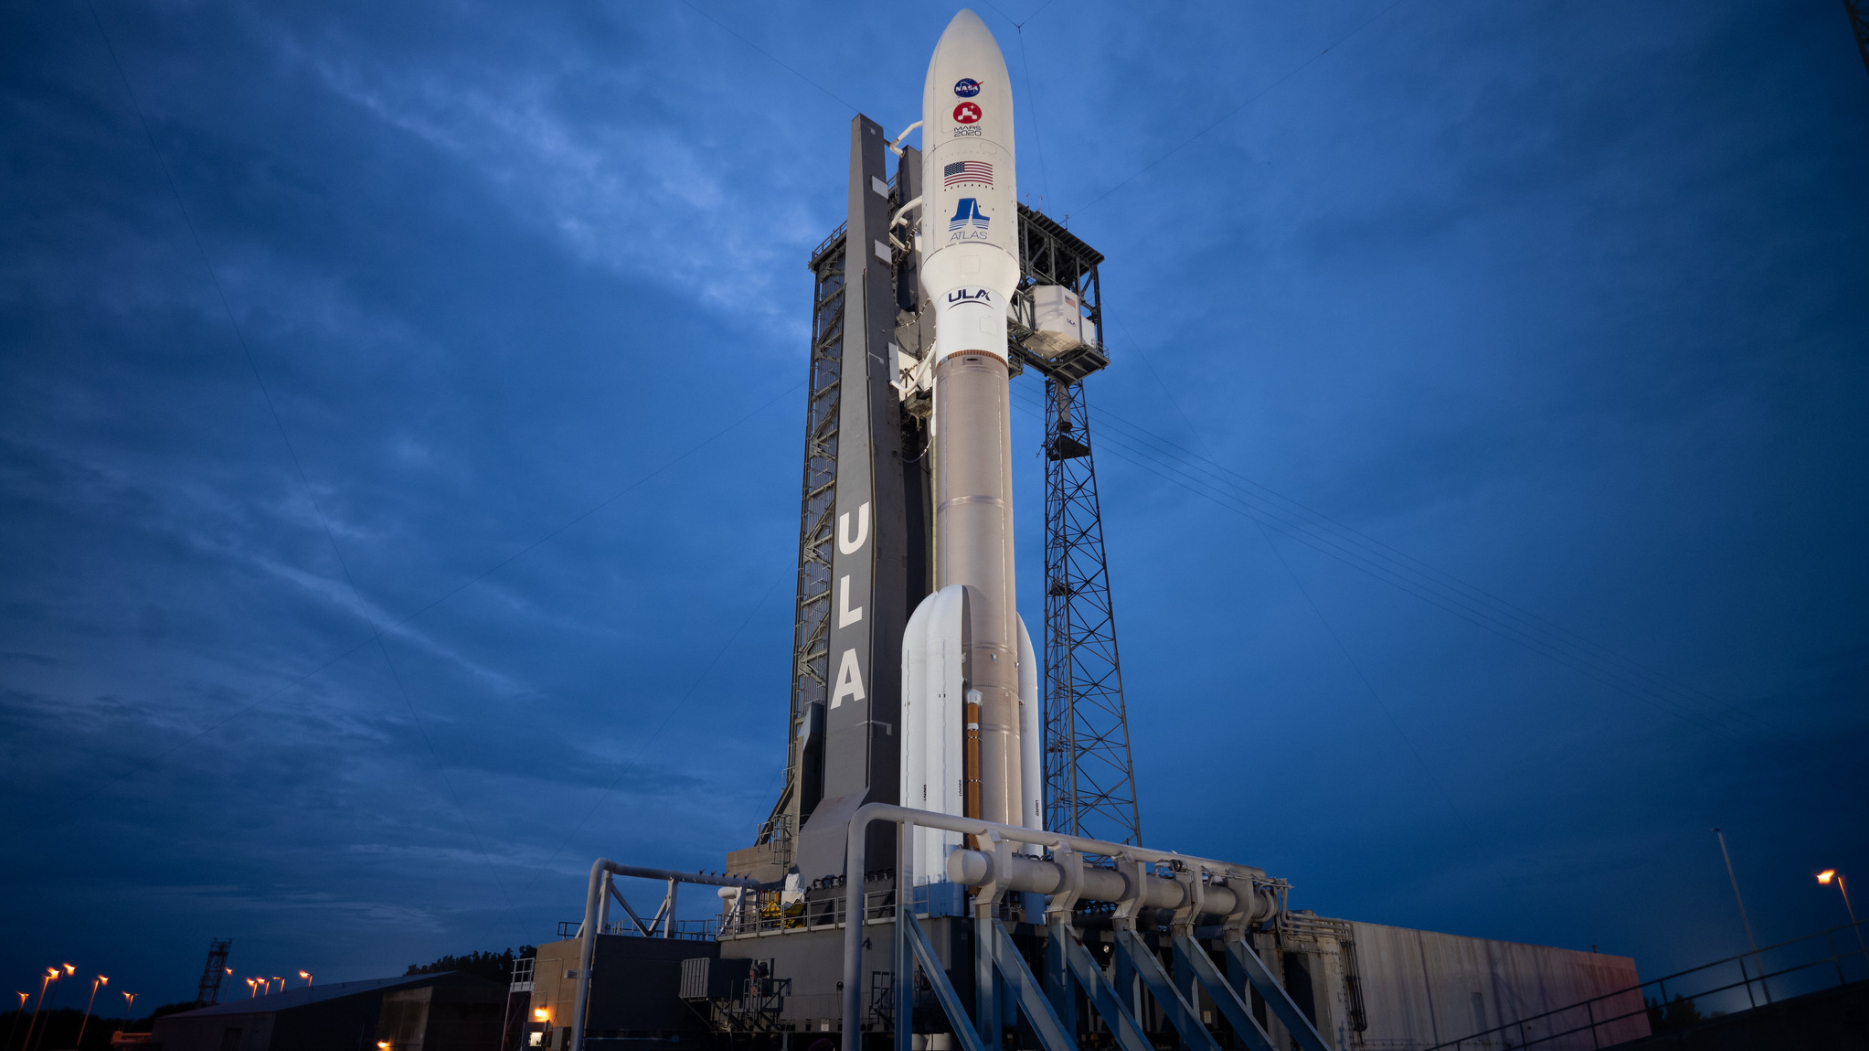 A United Launch Alliance Atlas V rocket with NASA’s Mars 2020 Perseverance rover onboard is seen illuminated by spotlights on the launch pad at Space Launch Complex 41, Tuesday, July 28, 2020, at Cape Canaveral Air Force Station in Florida.